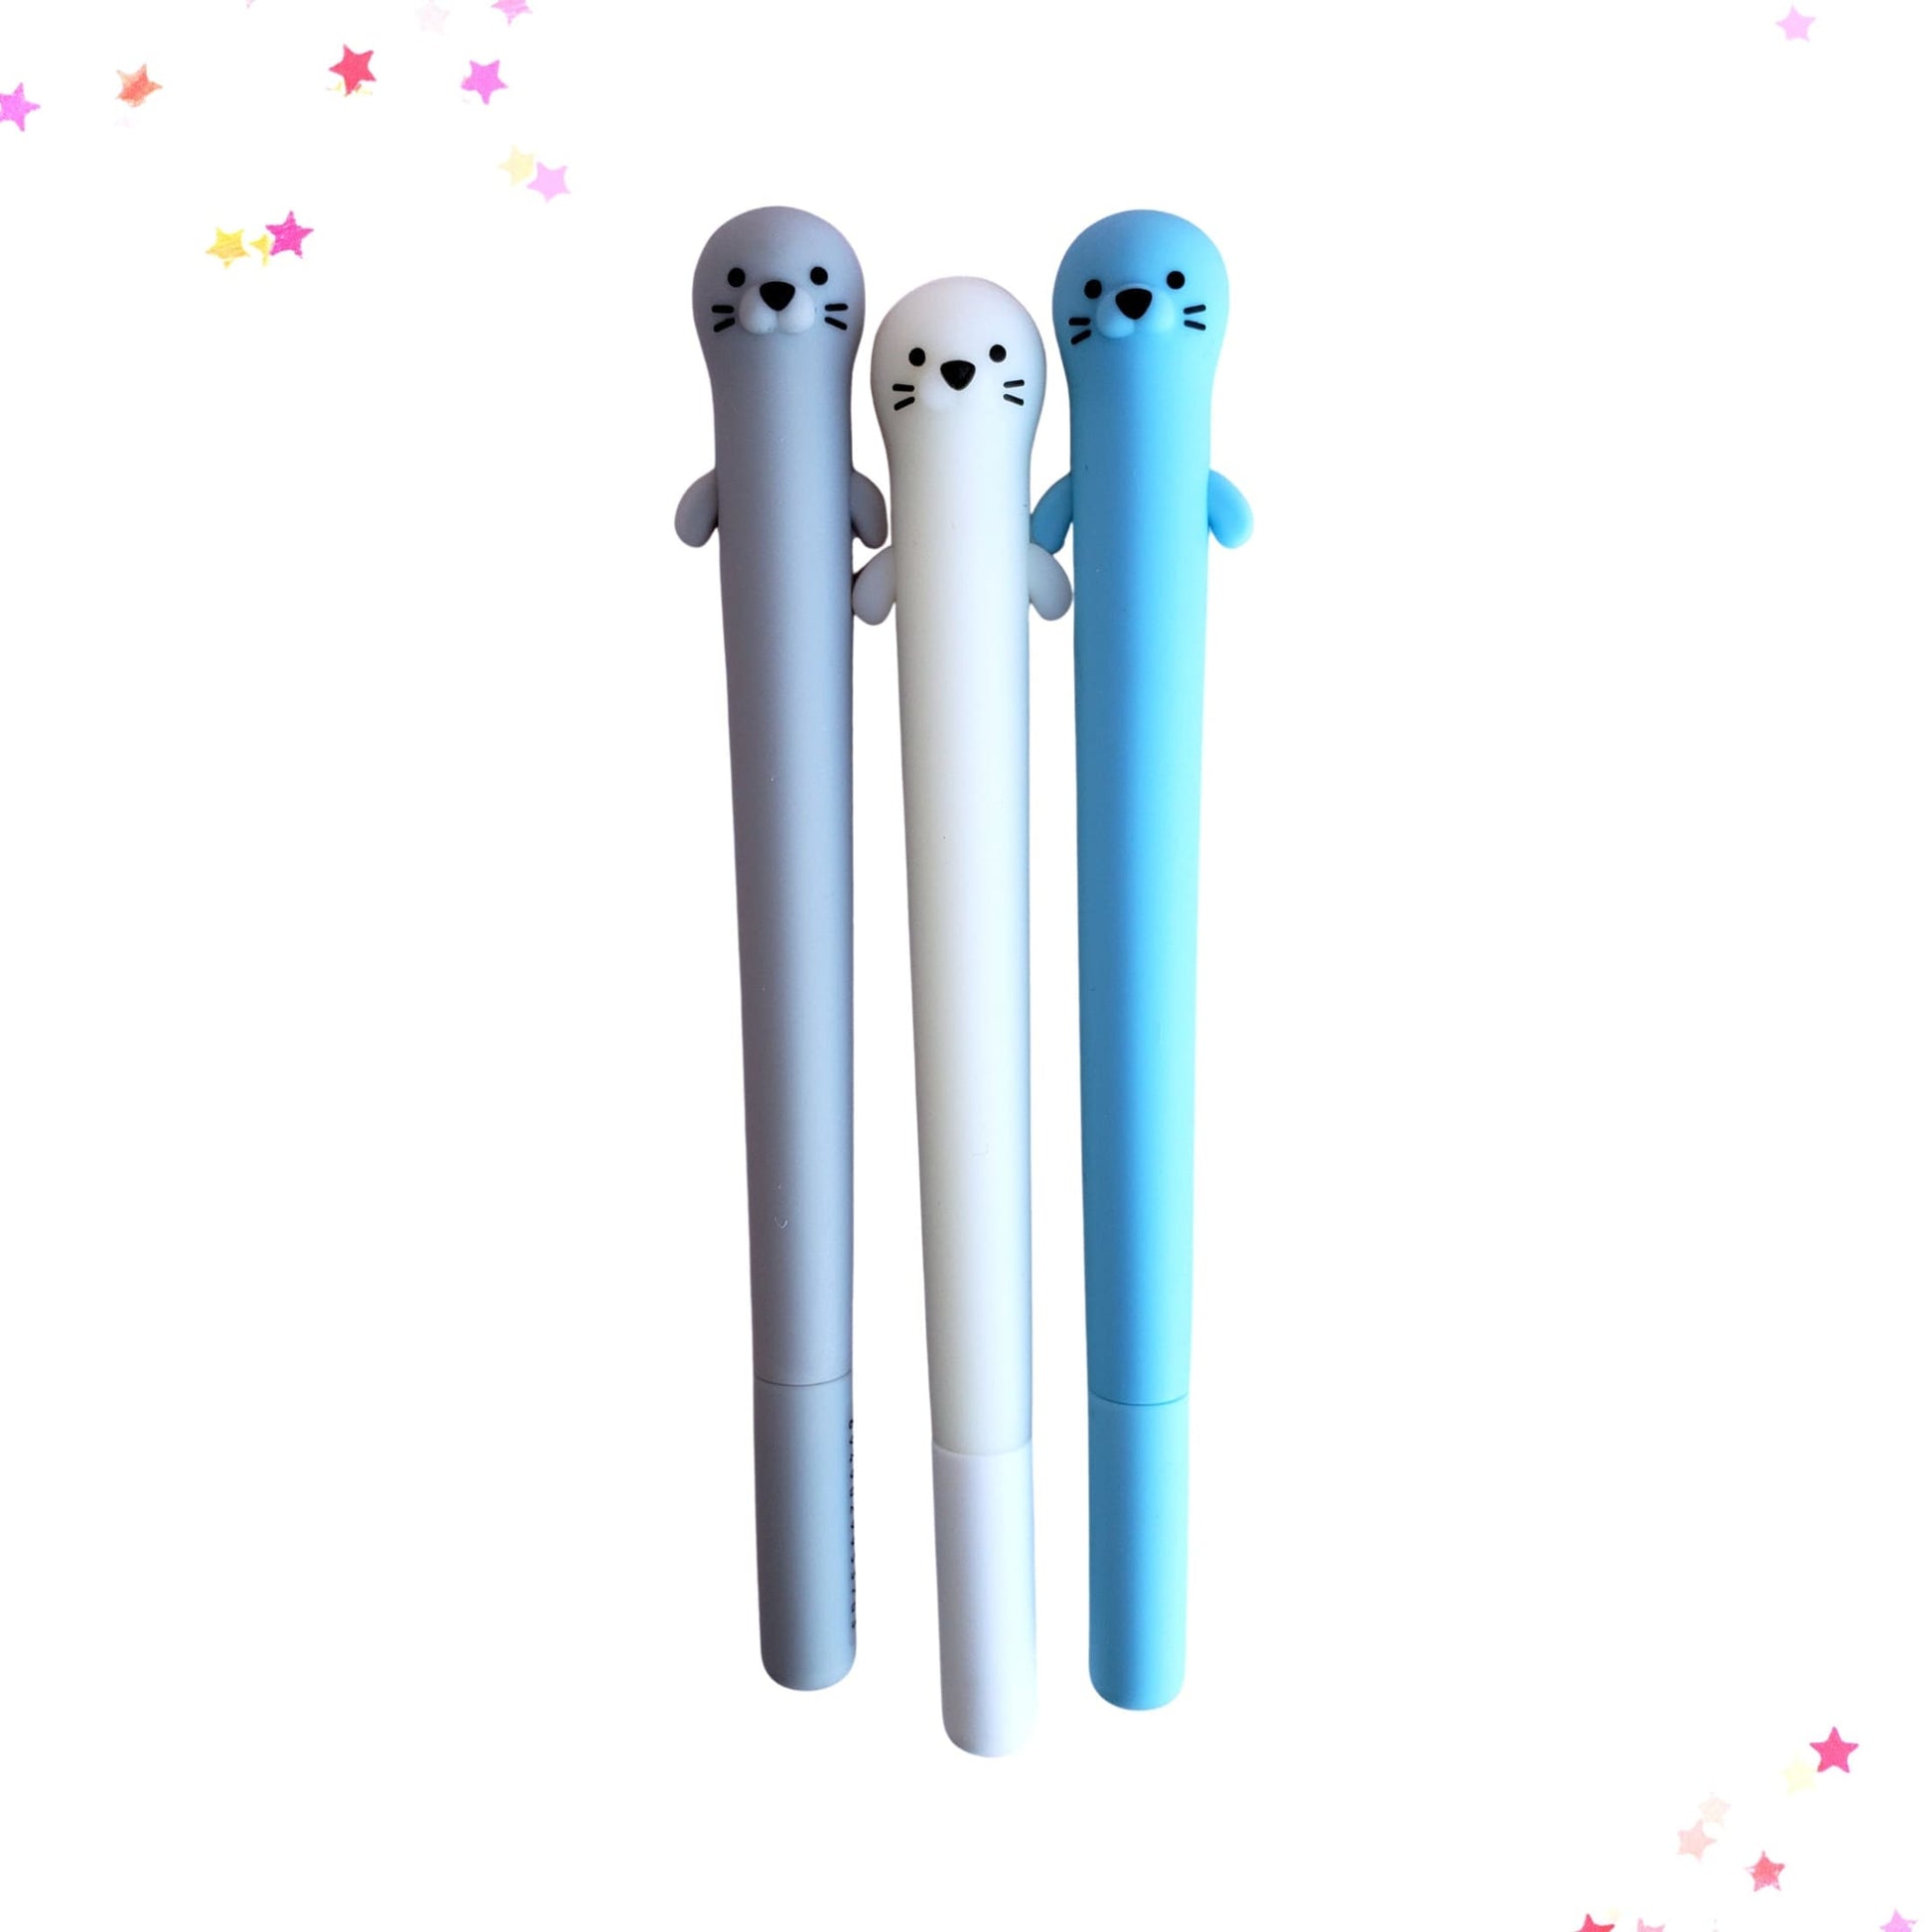 Adorable Silicone Otter Gel Pen from Confetti Kitty, Only 2.99